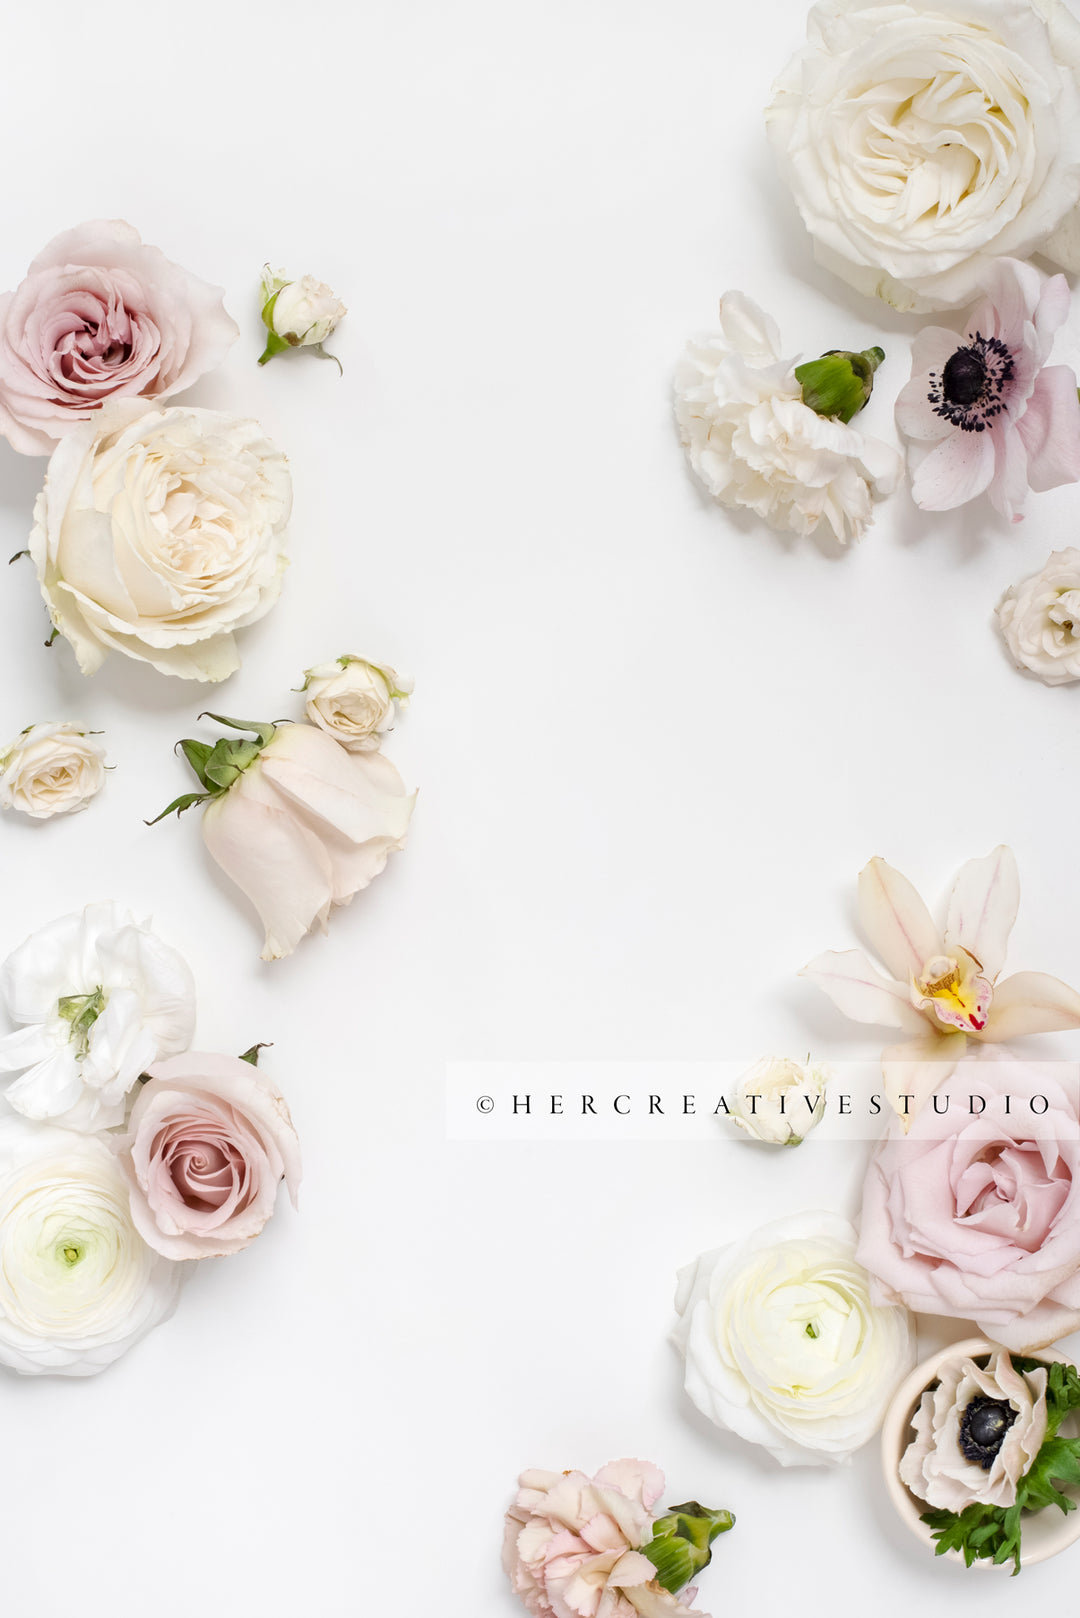 Pretty Pink and White Flowers on White Background, Styled Stock Image